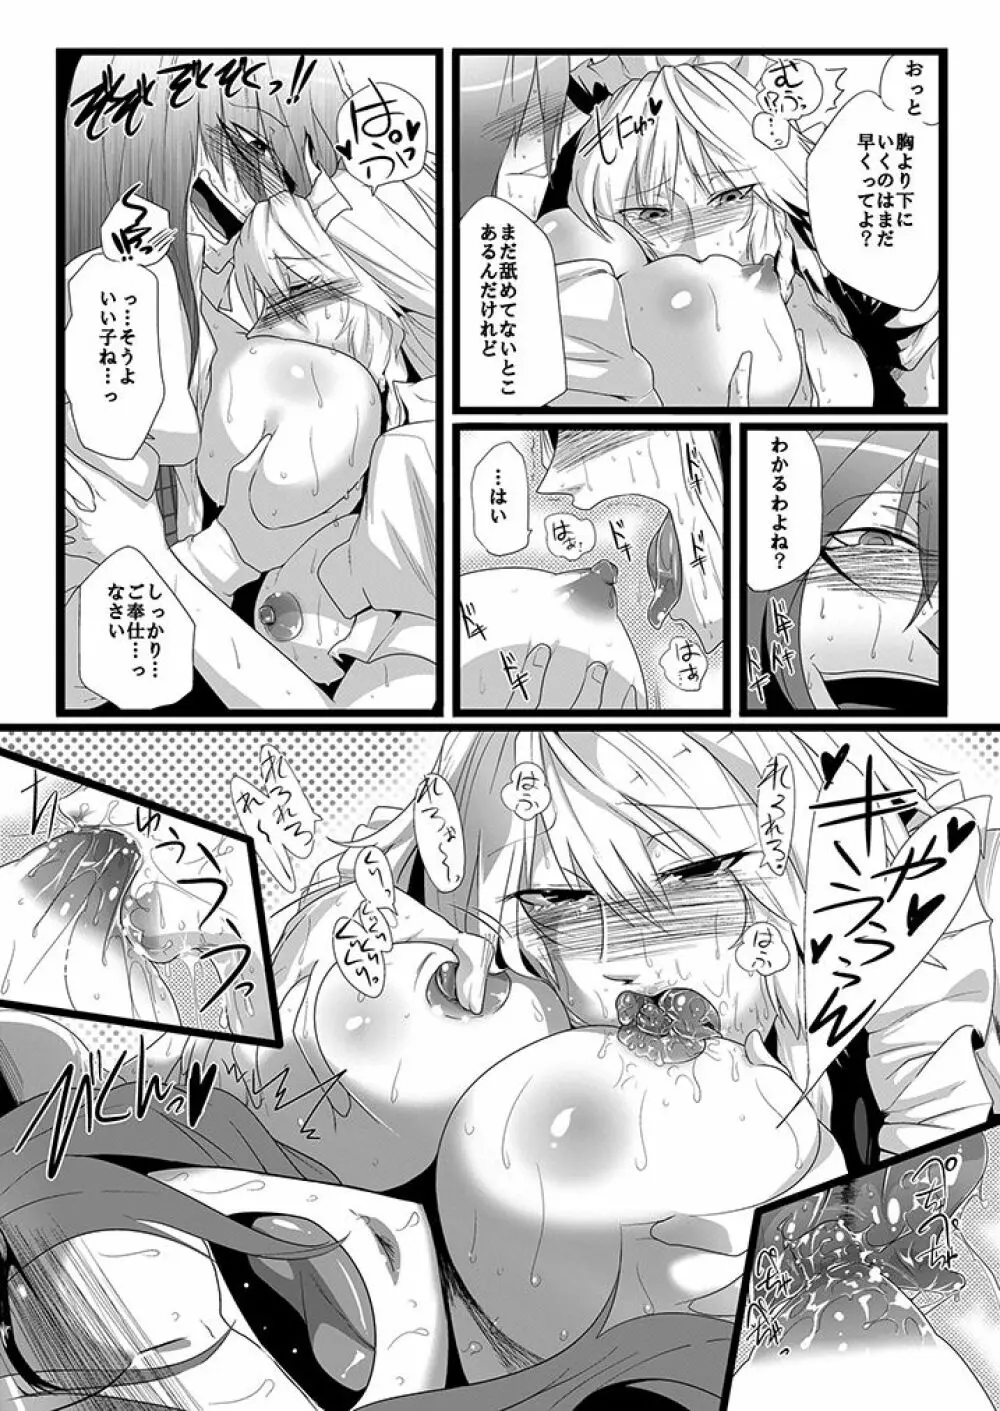 SAKUYA MAID in HEAVEN/ALL IN 1 - page262